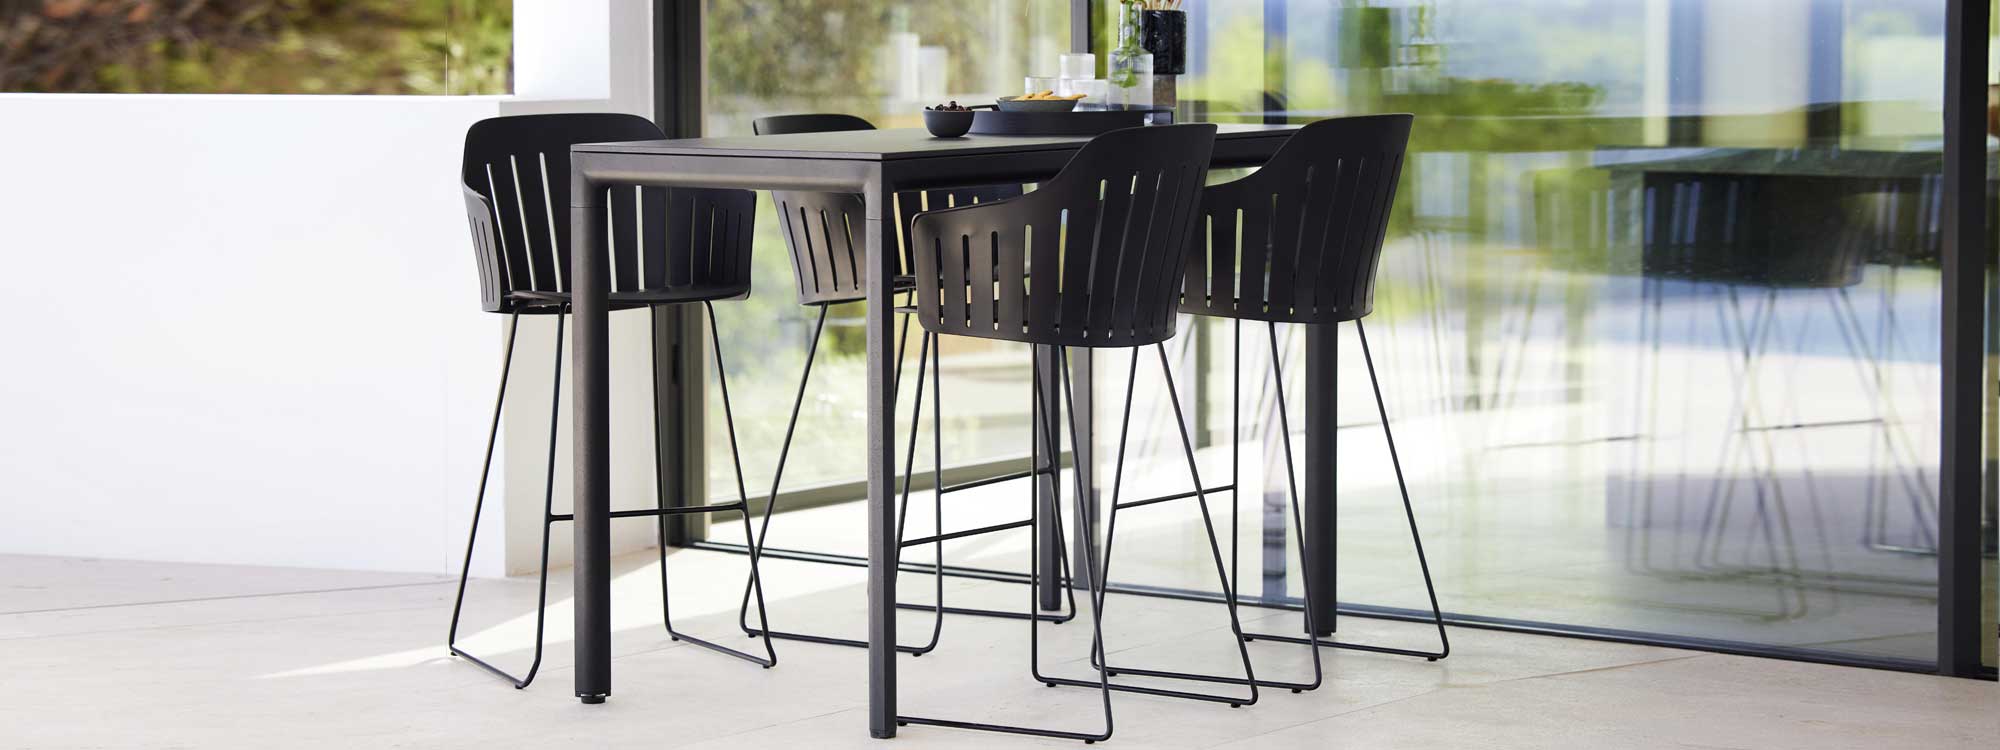 Image of Choice bar stools with recycled polypropylene seat shell and powder coated galvanised legs with Drop bar table by Cane-line